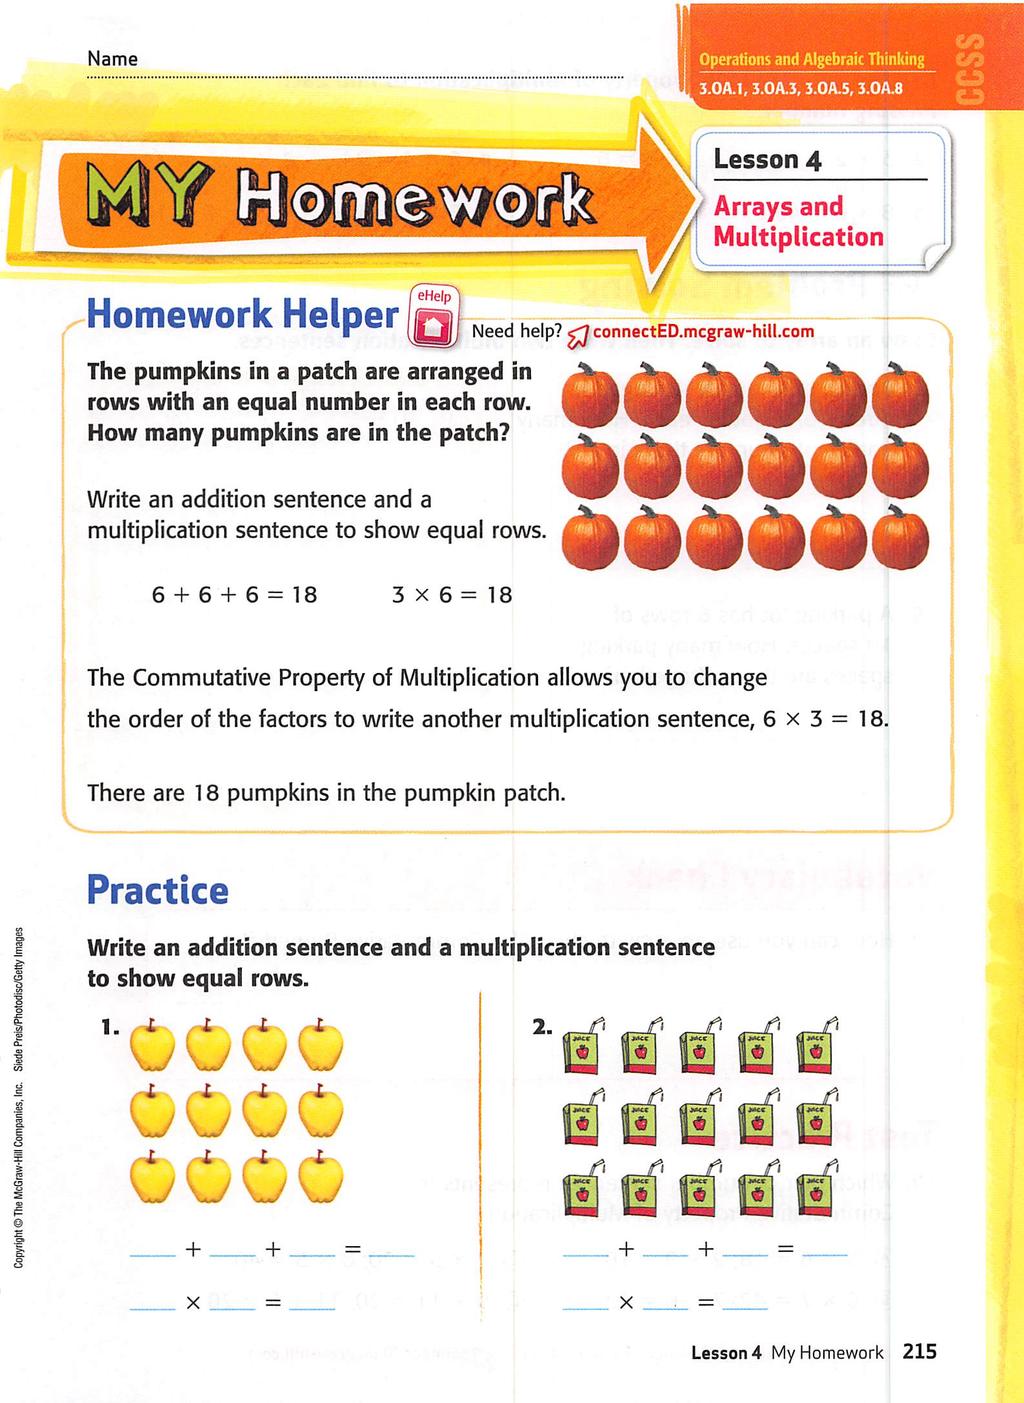 Name Operations and Aigebraic Thinking 3.0A.T, 3.0A.3, 3.0A.5, 3.0A.8 Lesson 4 Homework Helper [q The pumpkins in a patch are arranged in rows with an equal number in each row.